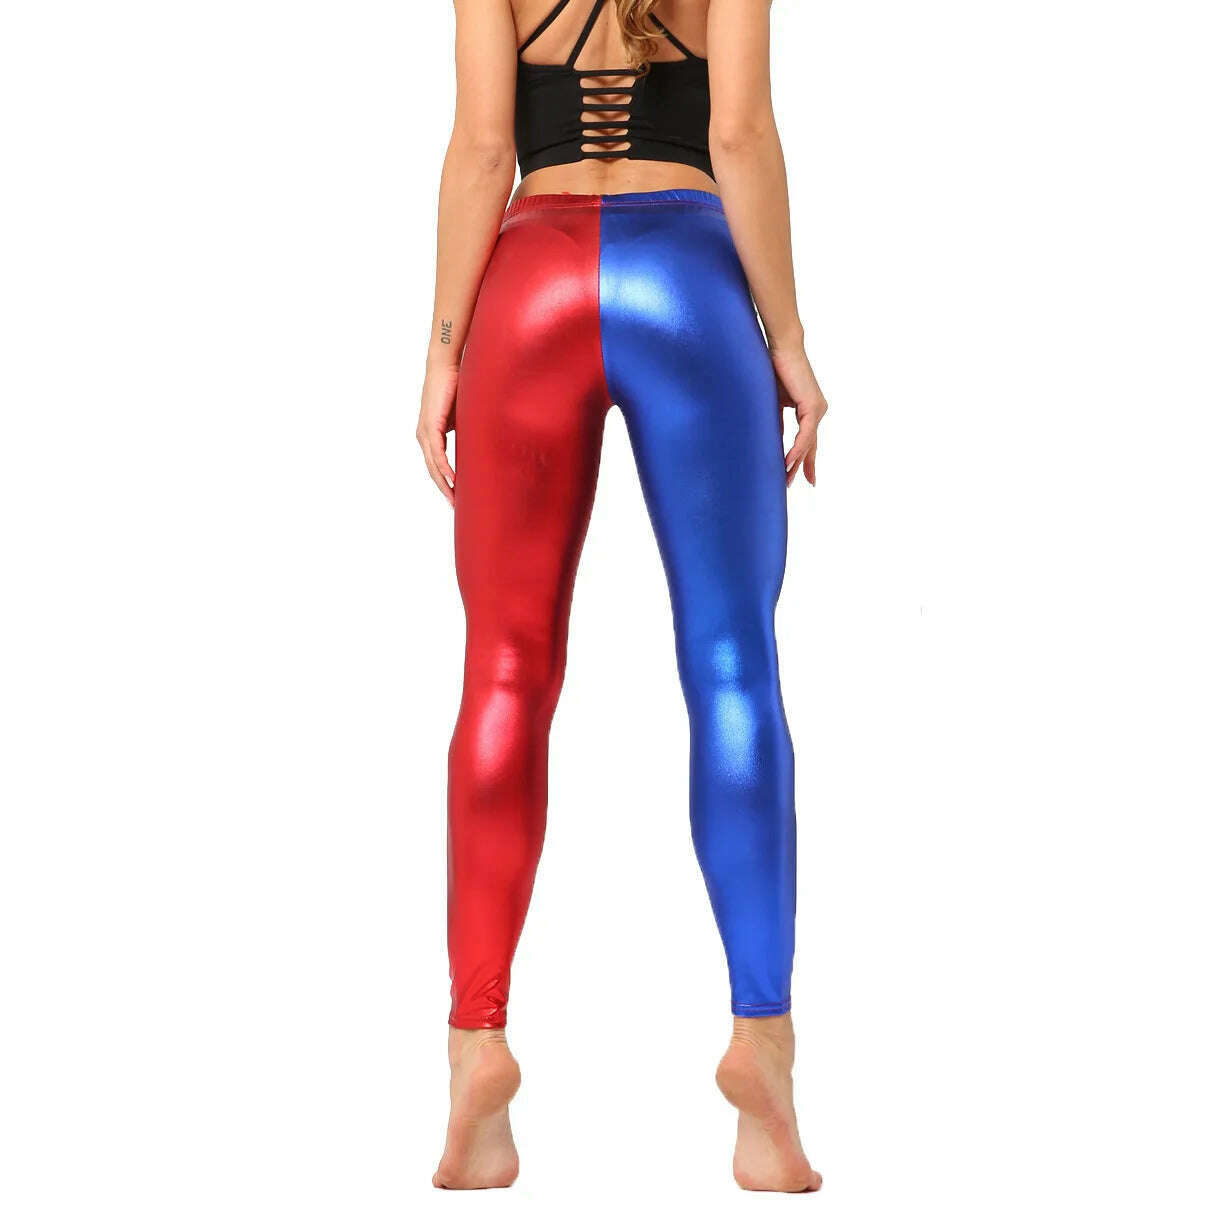 KIMLUD, Metallic Color PU Leggings Women Faux Leather Pants Dancing Party Pant Sexy Night Club Skinny Costume Pants Tight Trousers, Red blue / One size 50kg below, KIMLUD Womens Clothes